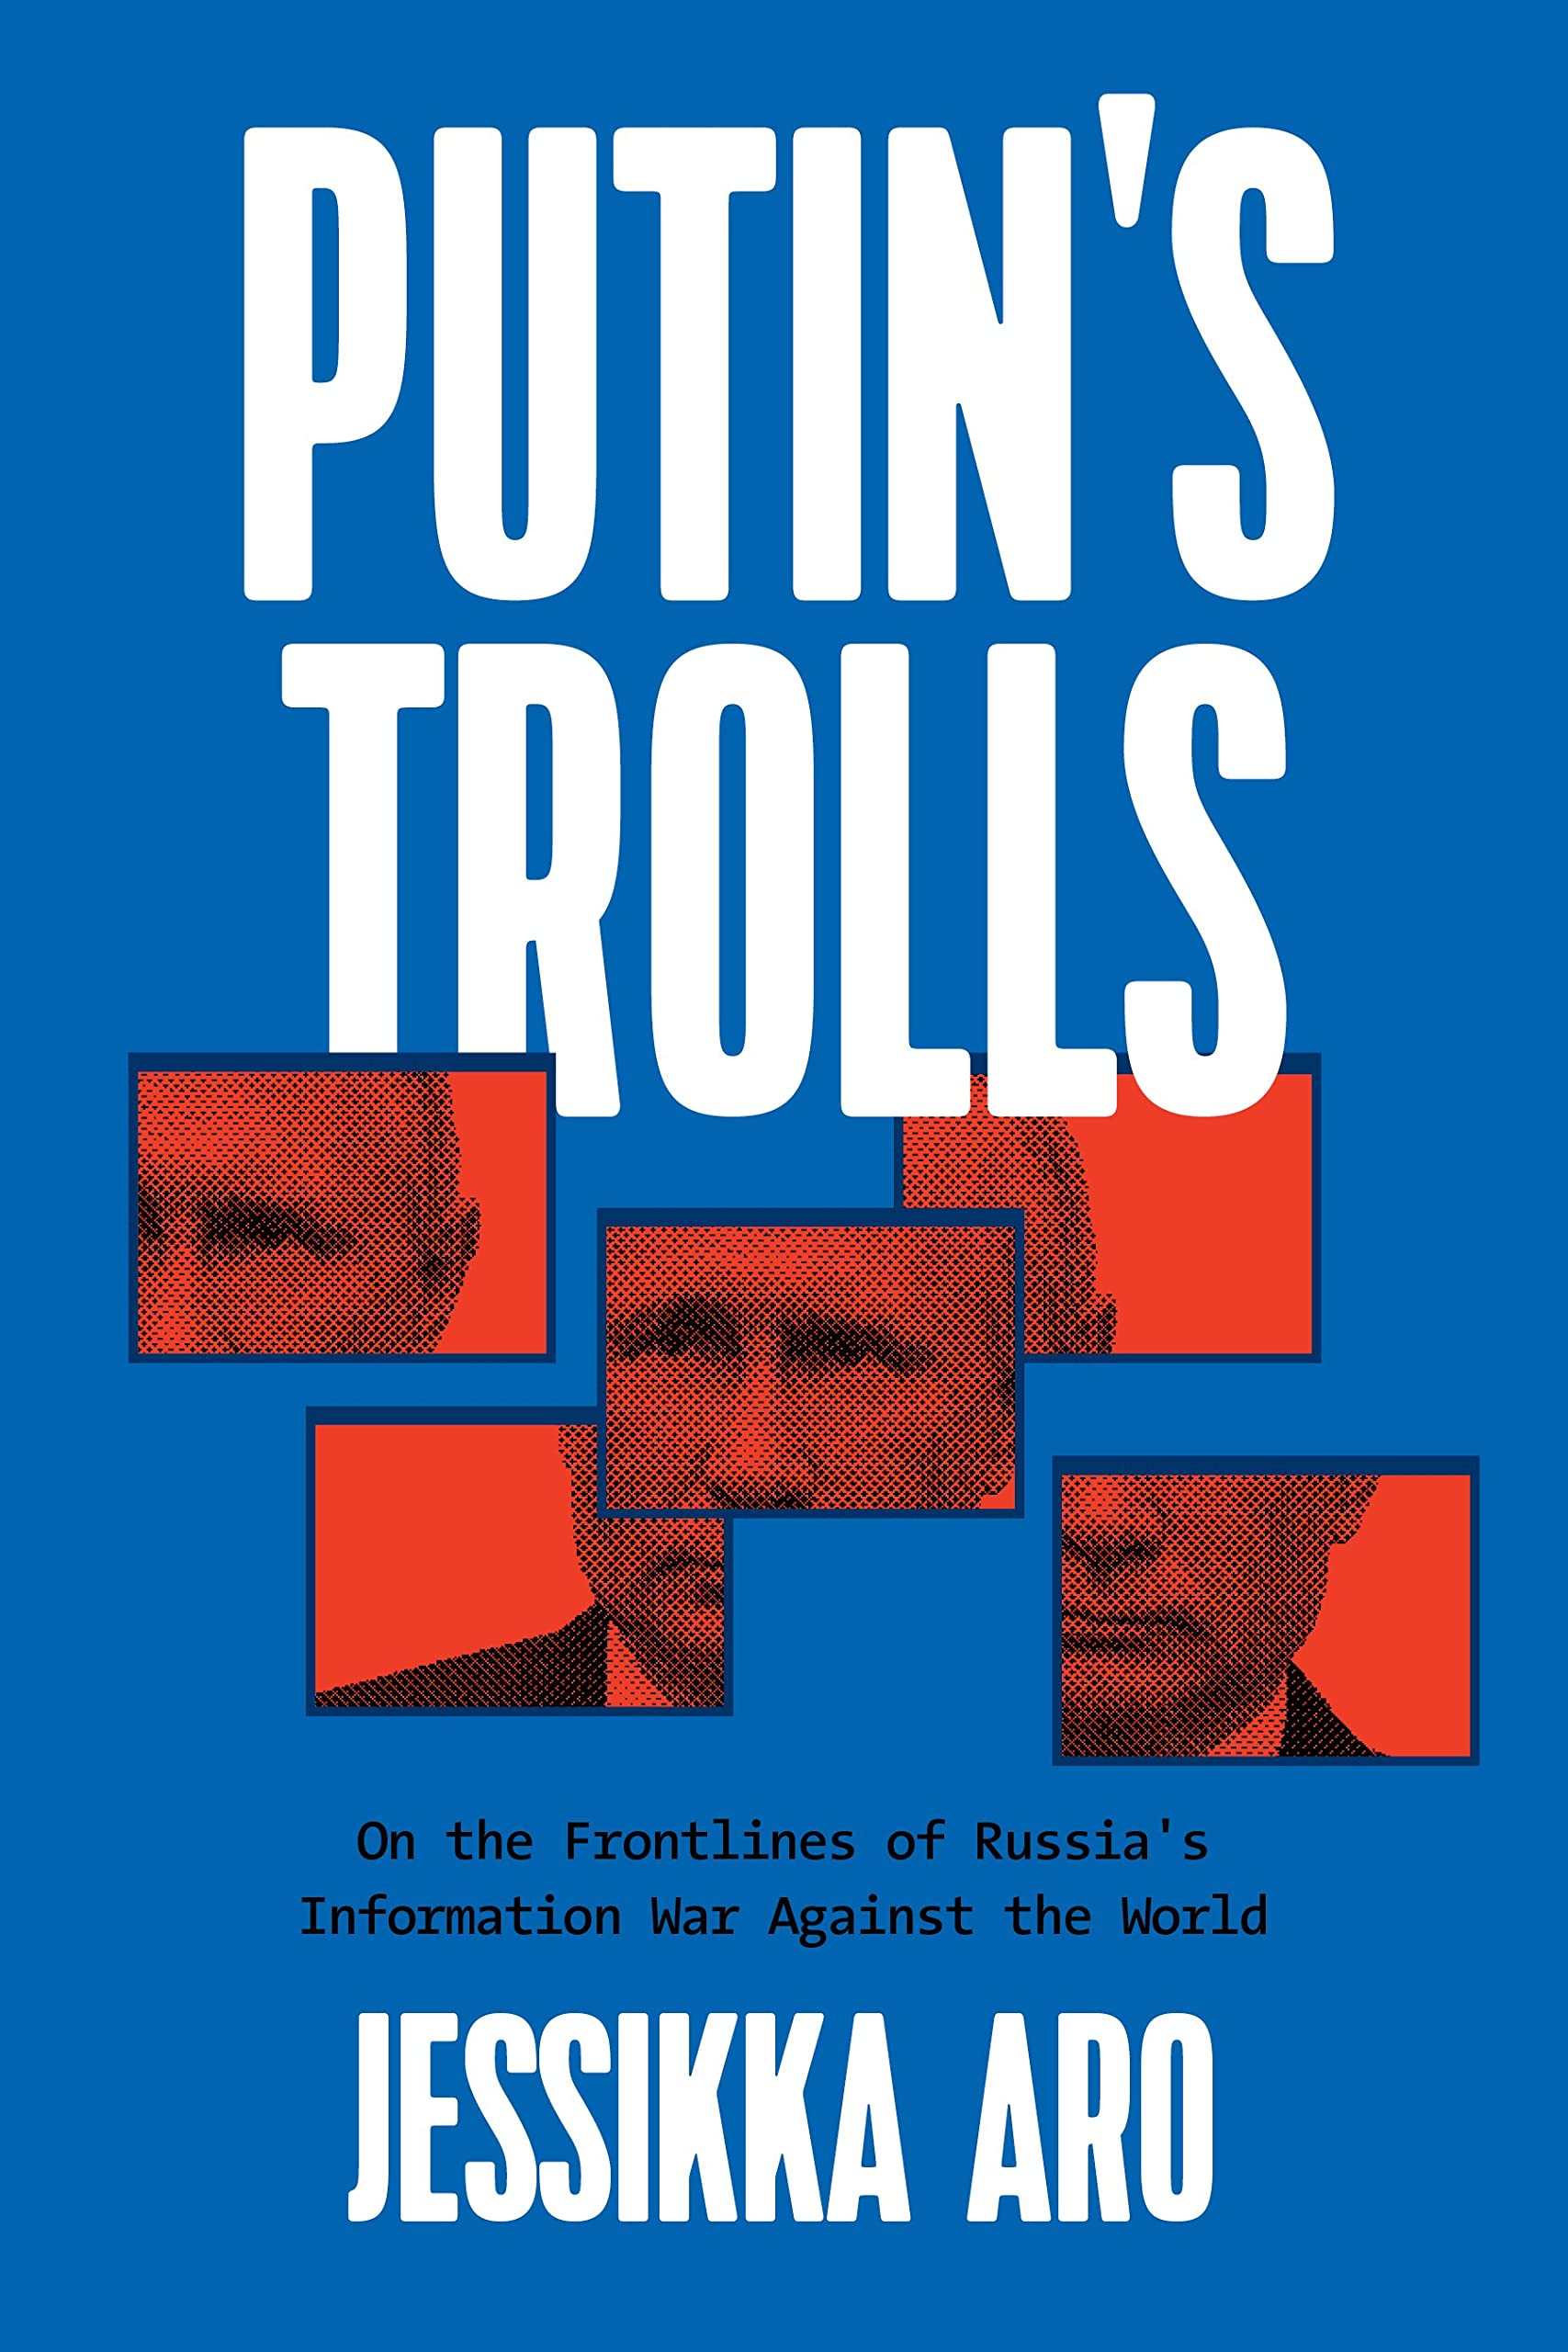 Jessikka Aro's Putin's Trolls: On the Frontlines of Russia's Information War Against the World book cover